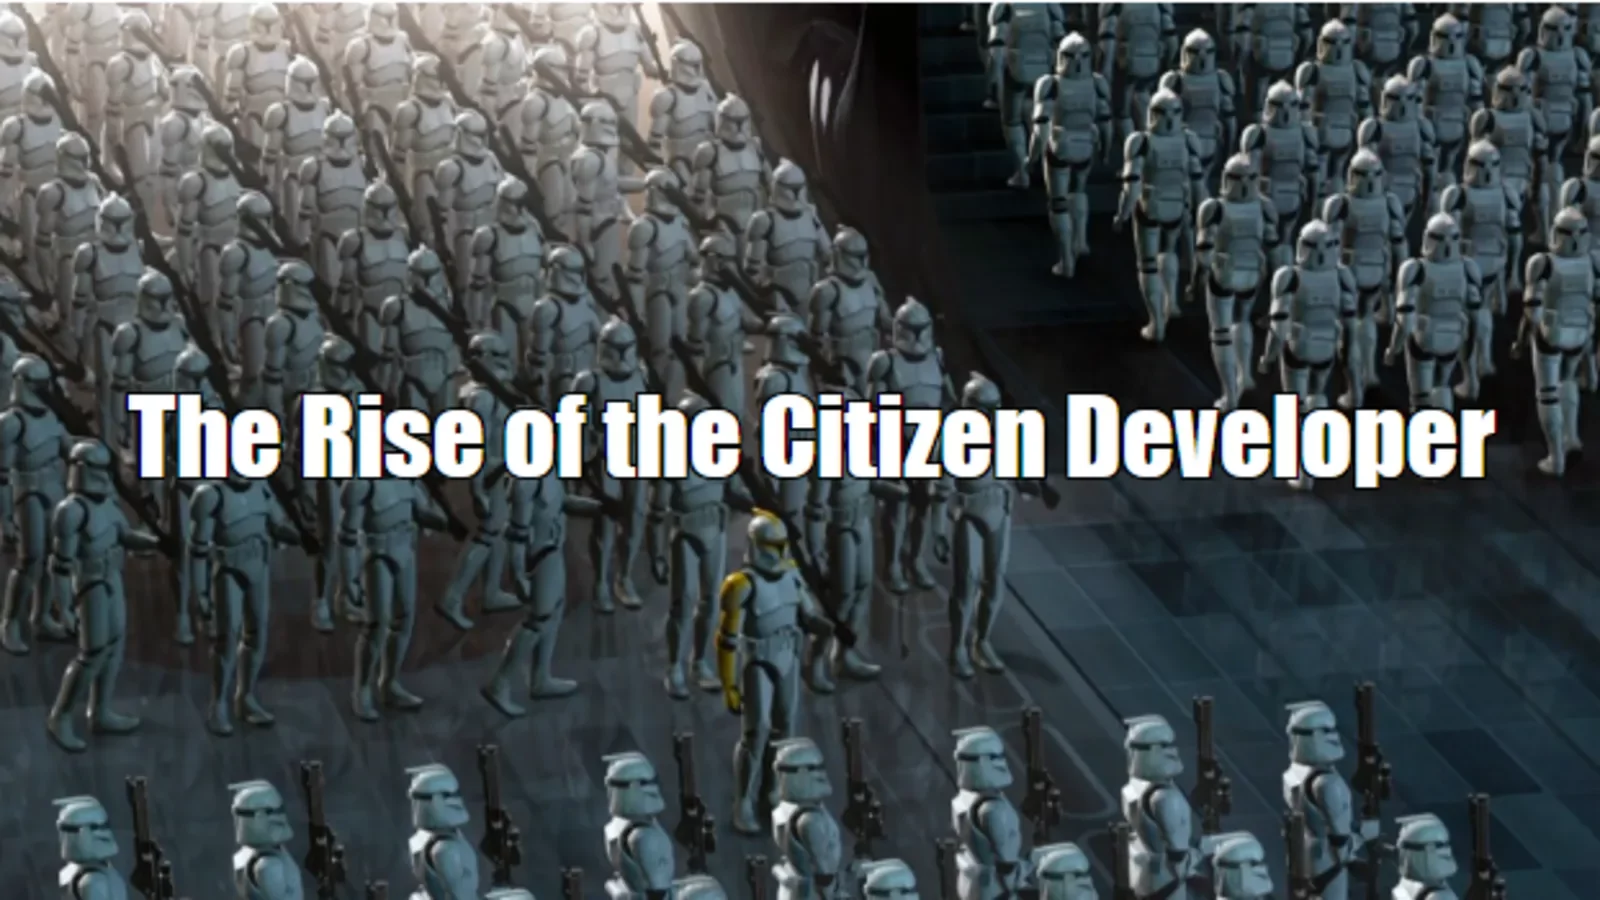 Pro vs citizen dev - what's the difference?